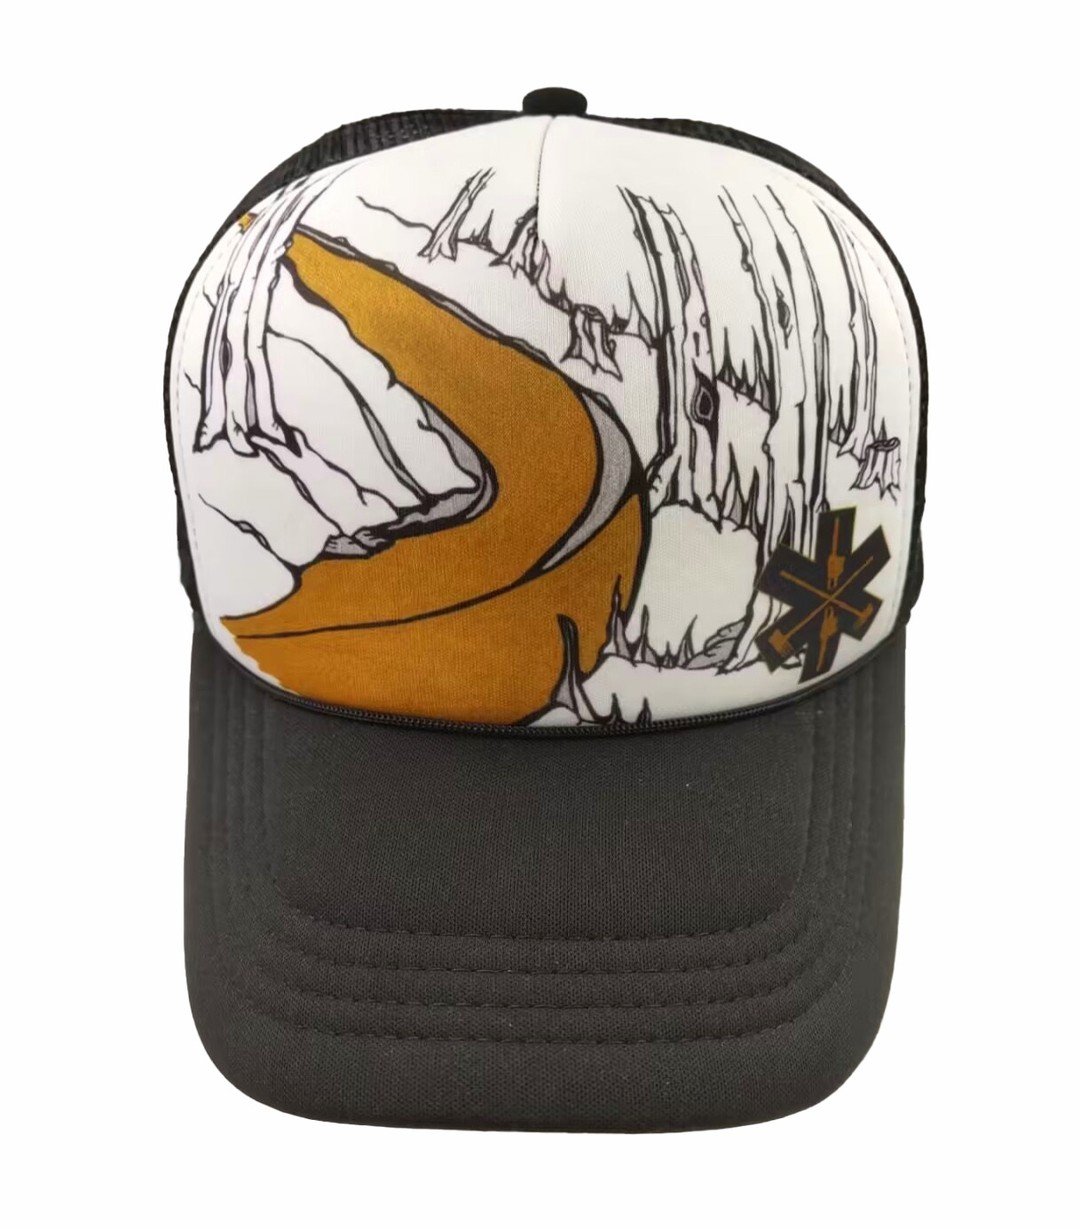 DO YOU LIKE HATS? We've got a super limited, suuuper sweet hat designed by @flowfactorynw and generously provided by @rei Medford. The design is inspired by the Jabberwocky trail. And we want to get one into your hands if you are a regular trail day 